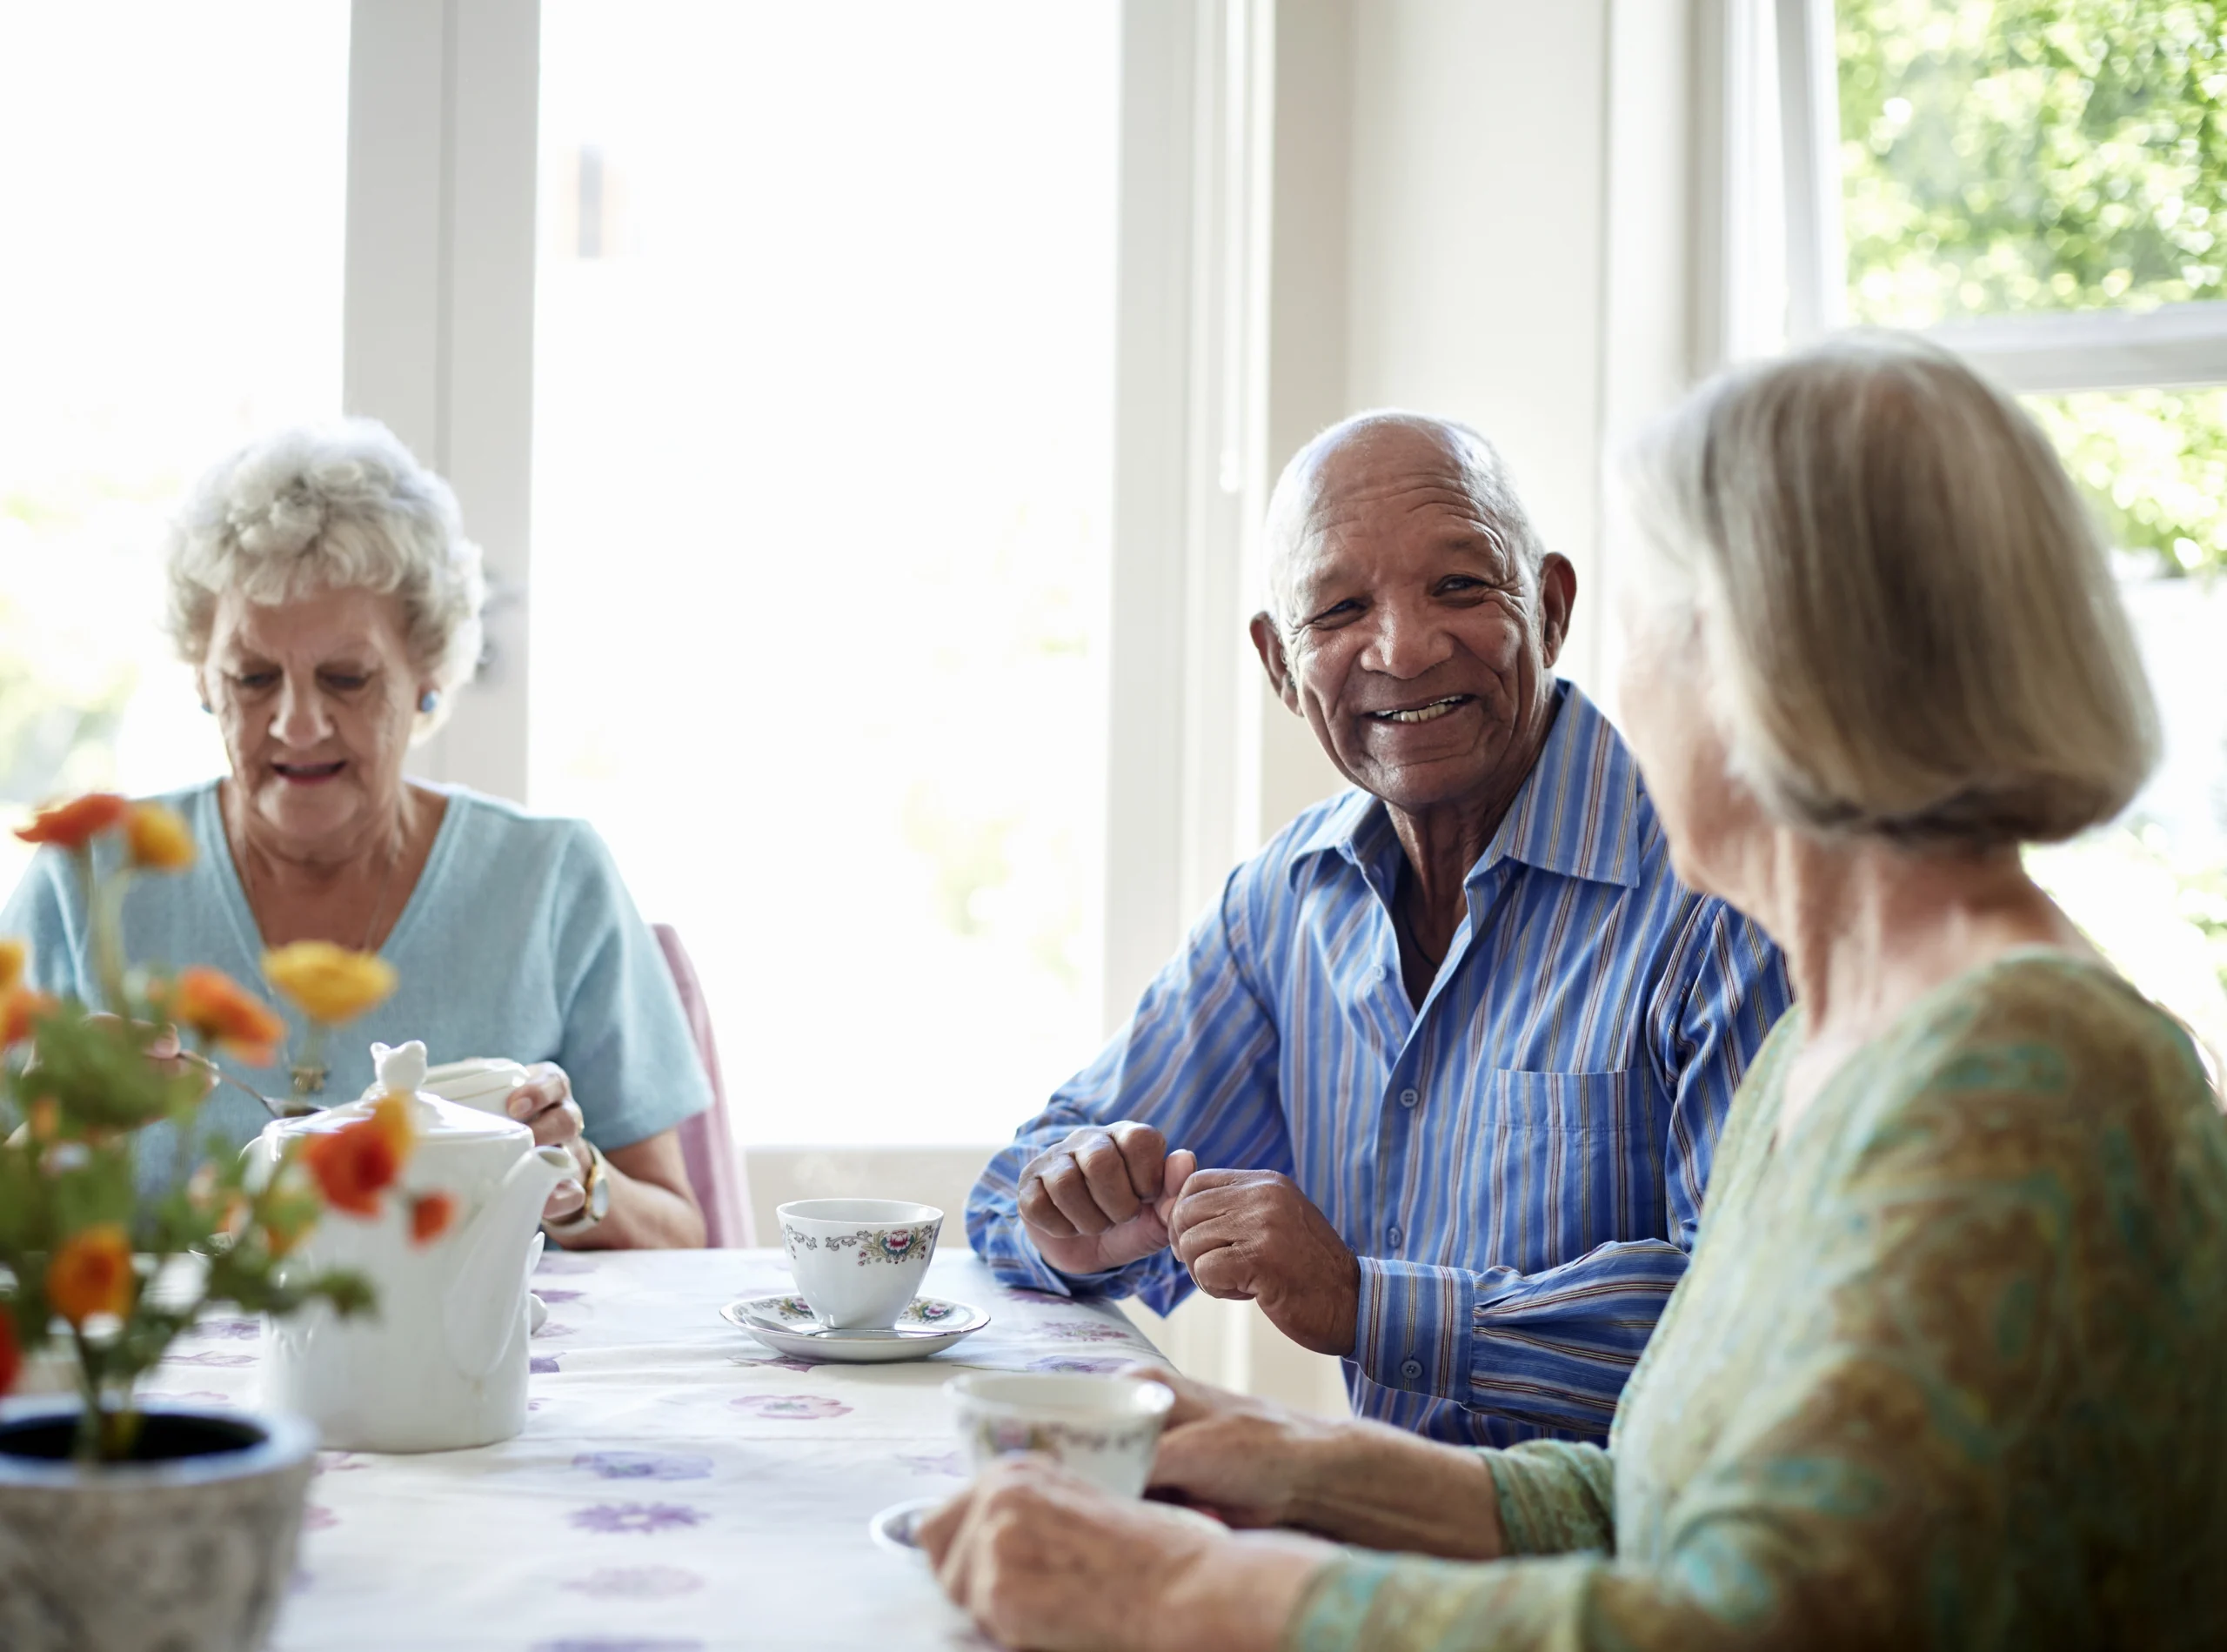 Group of three senior citizens, on man and two women, smiling and drinking tea